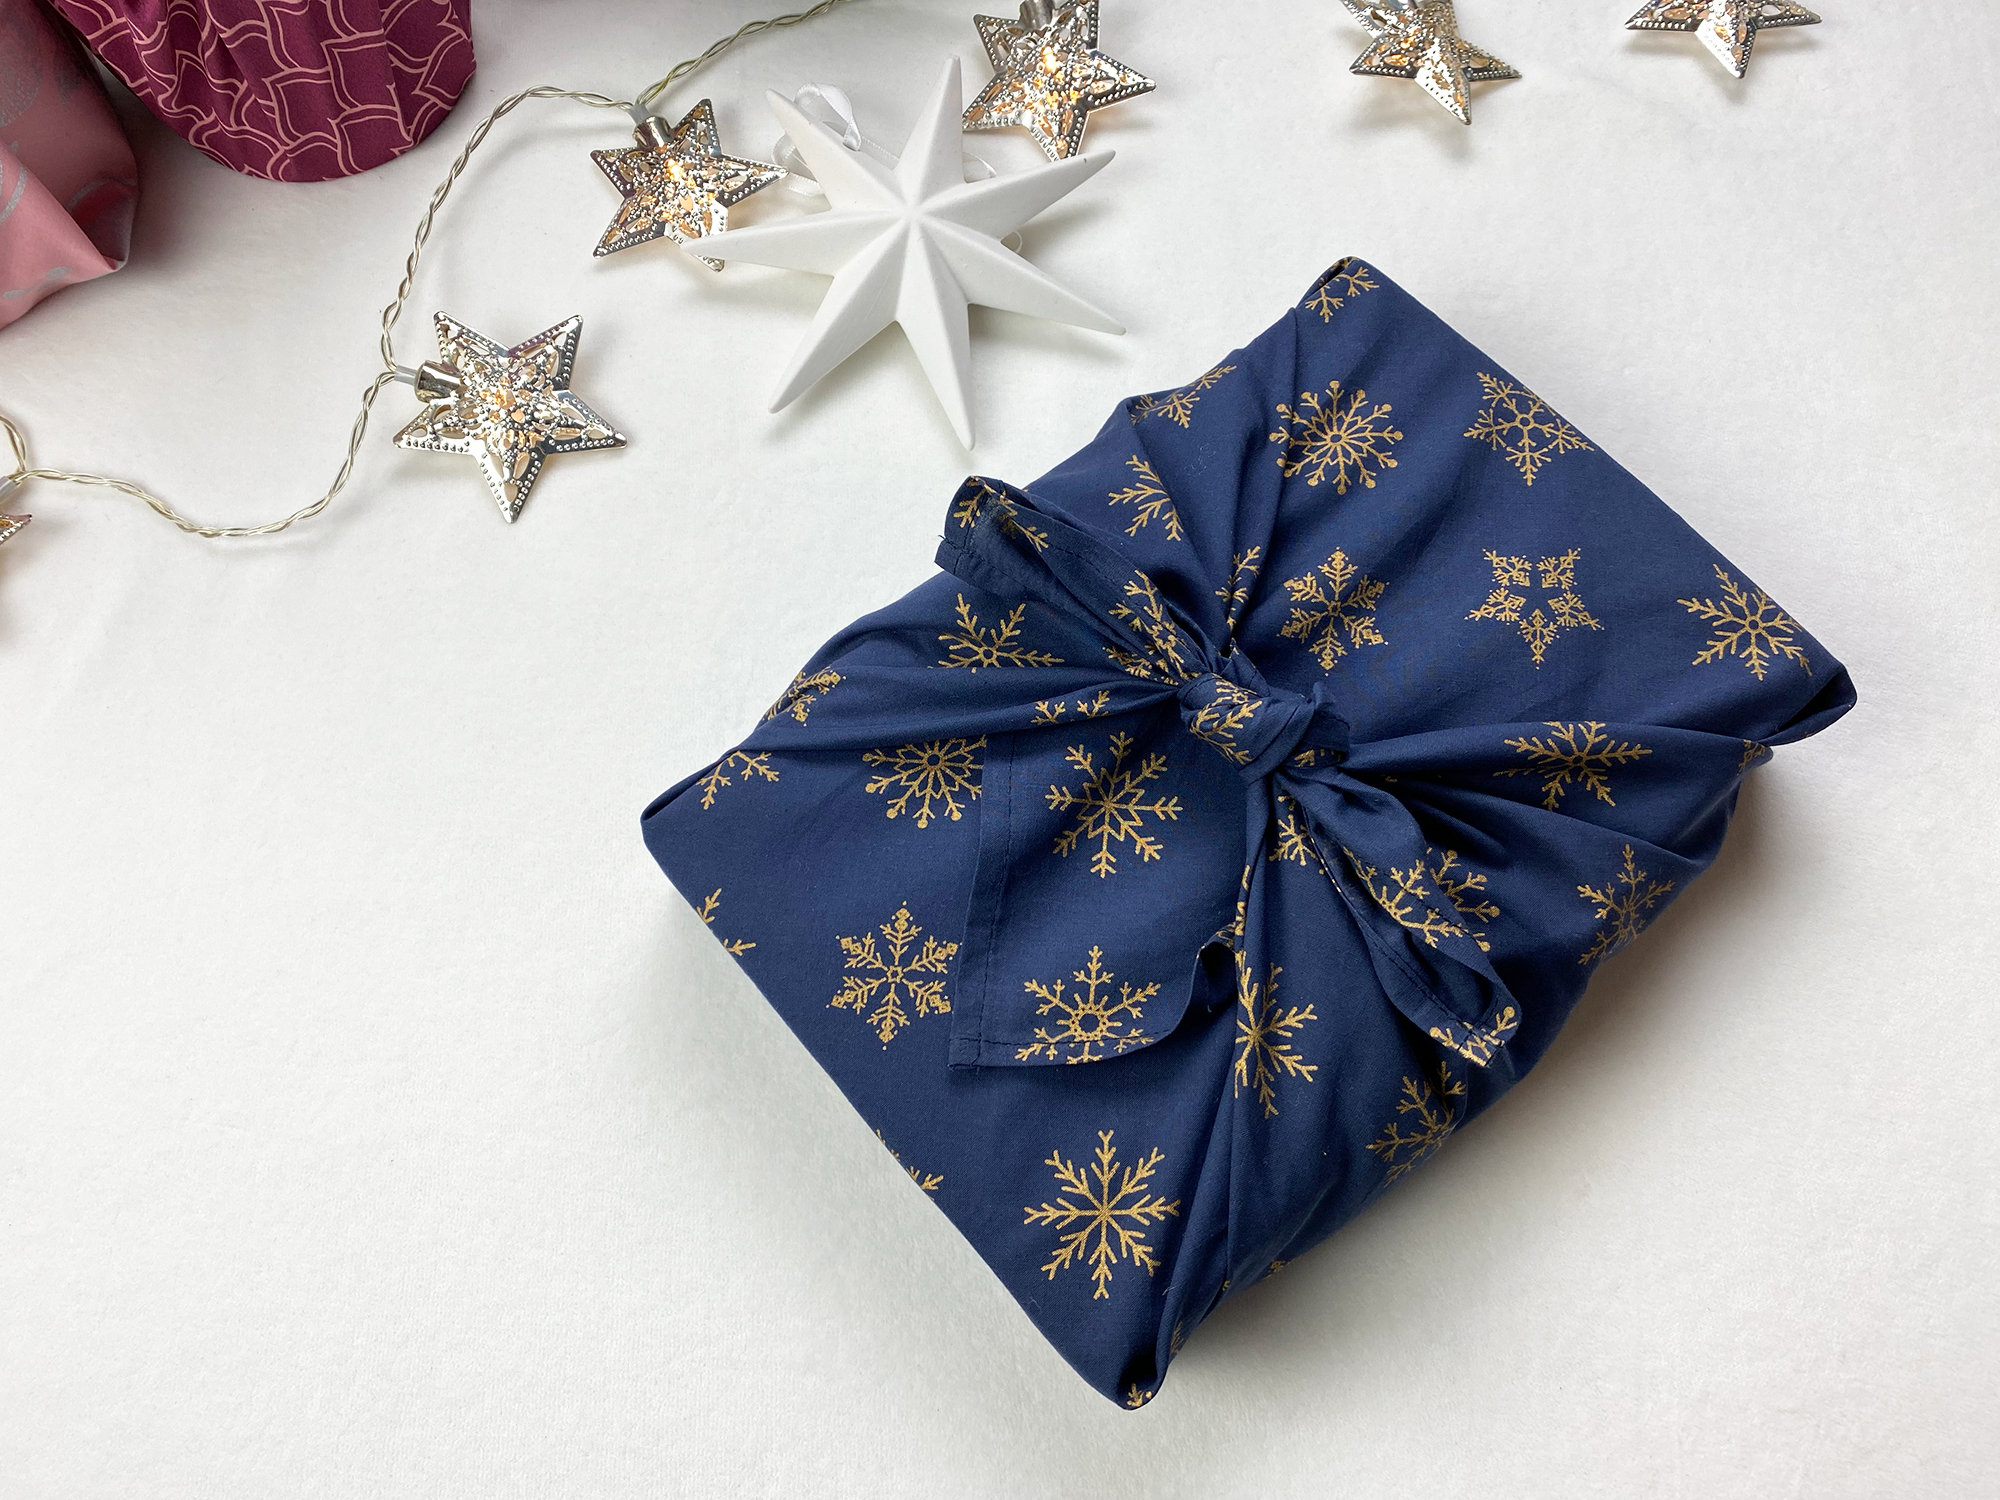 Navy Star, Reusable Fabric Gift Wrap with Ribbon